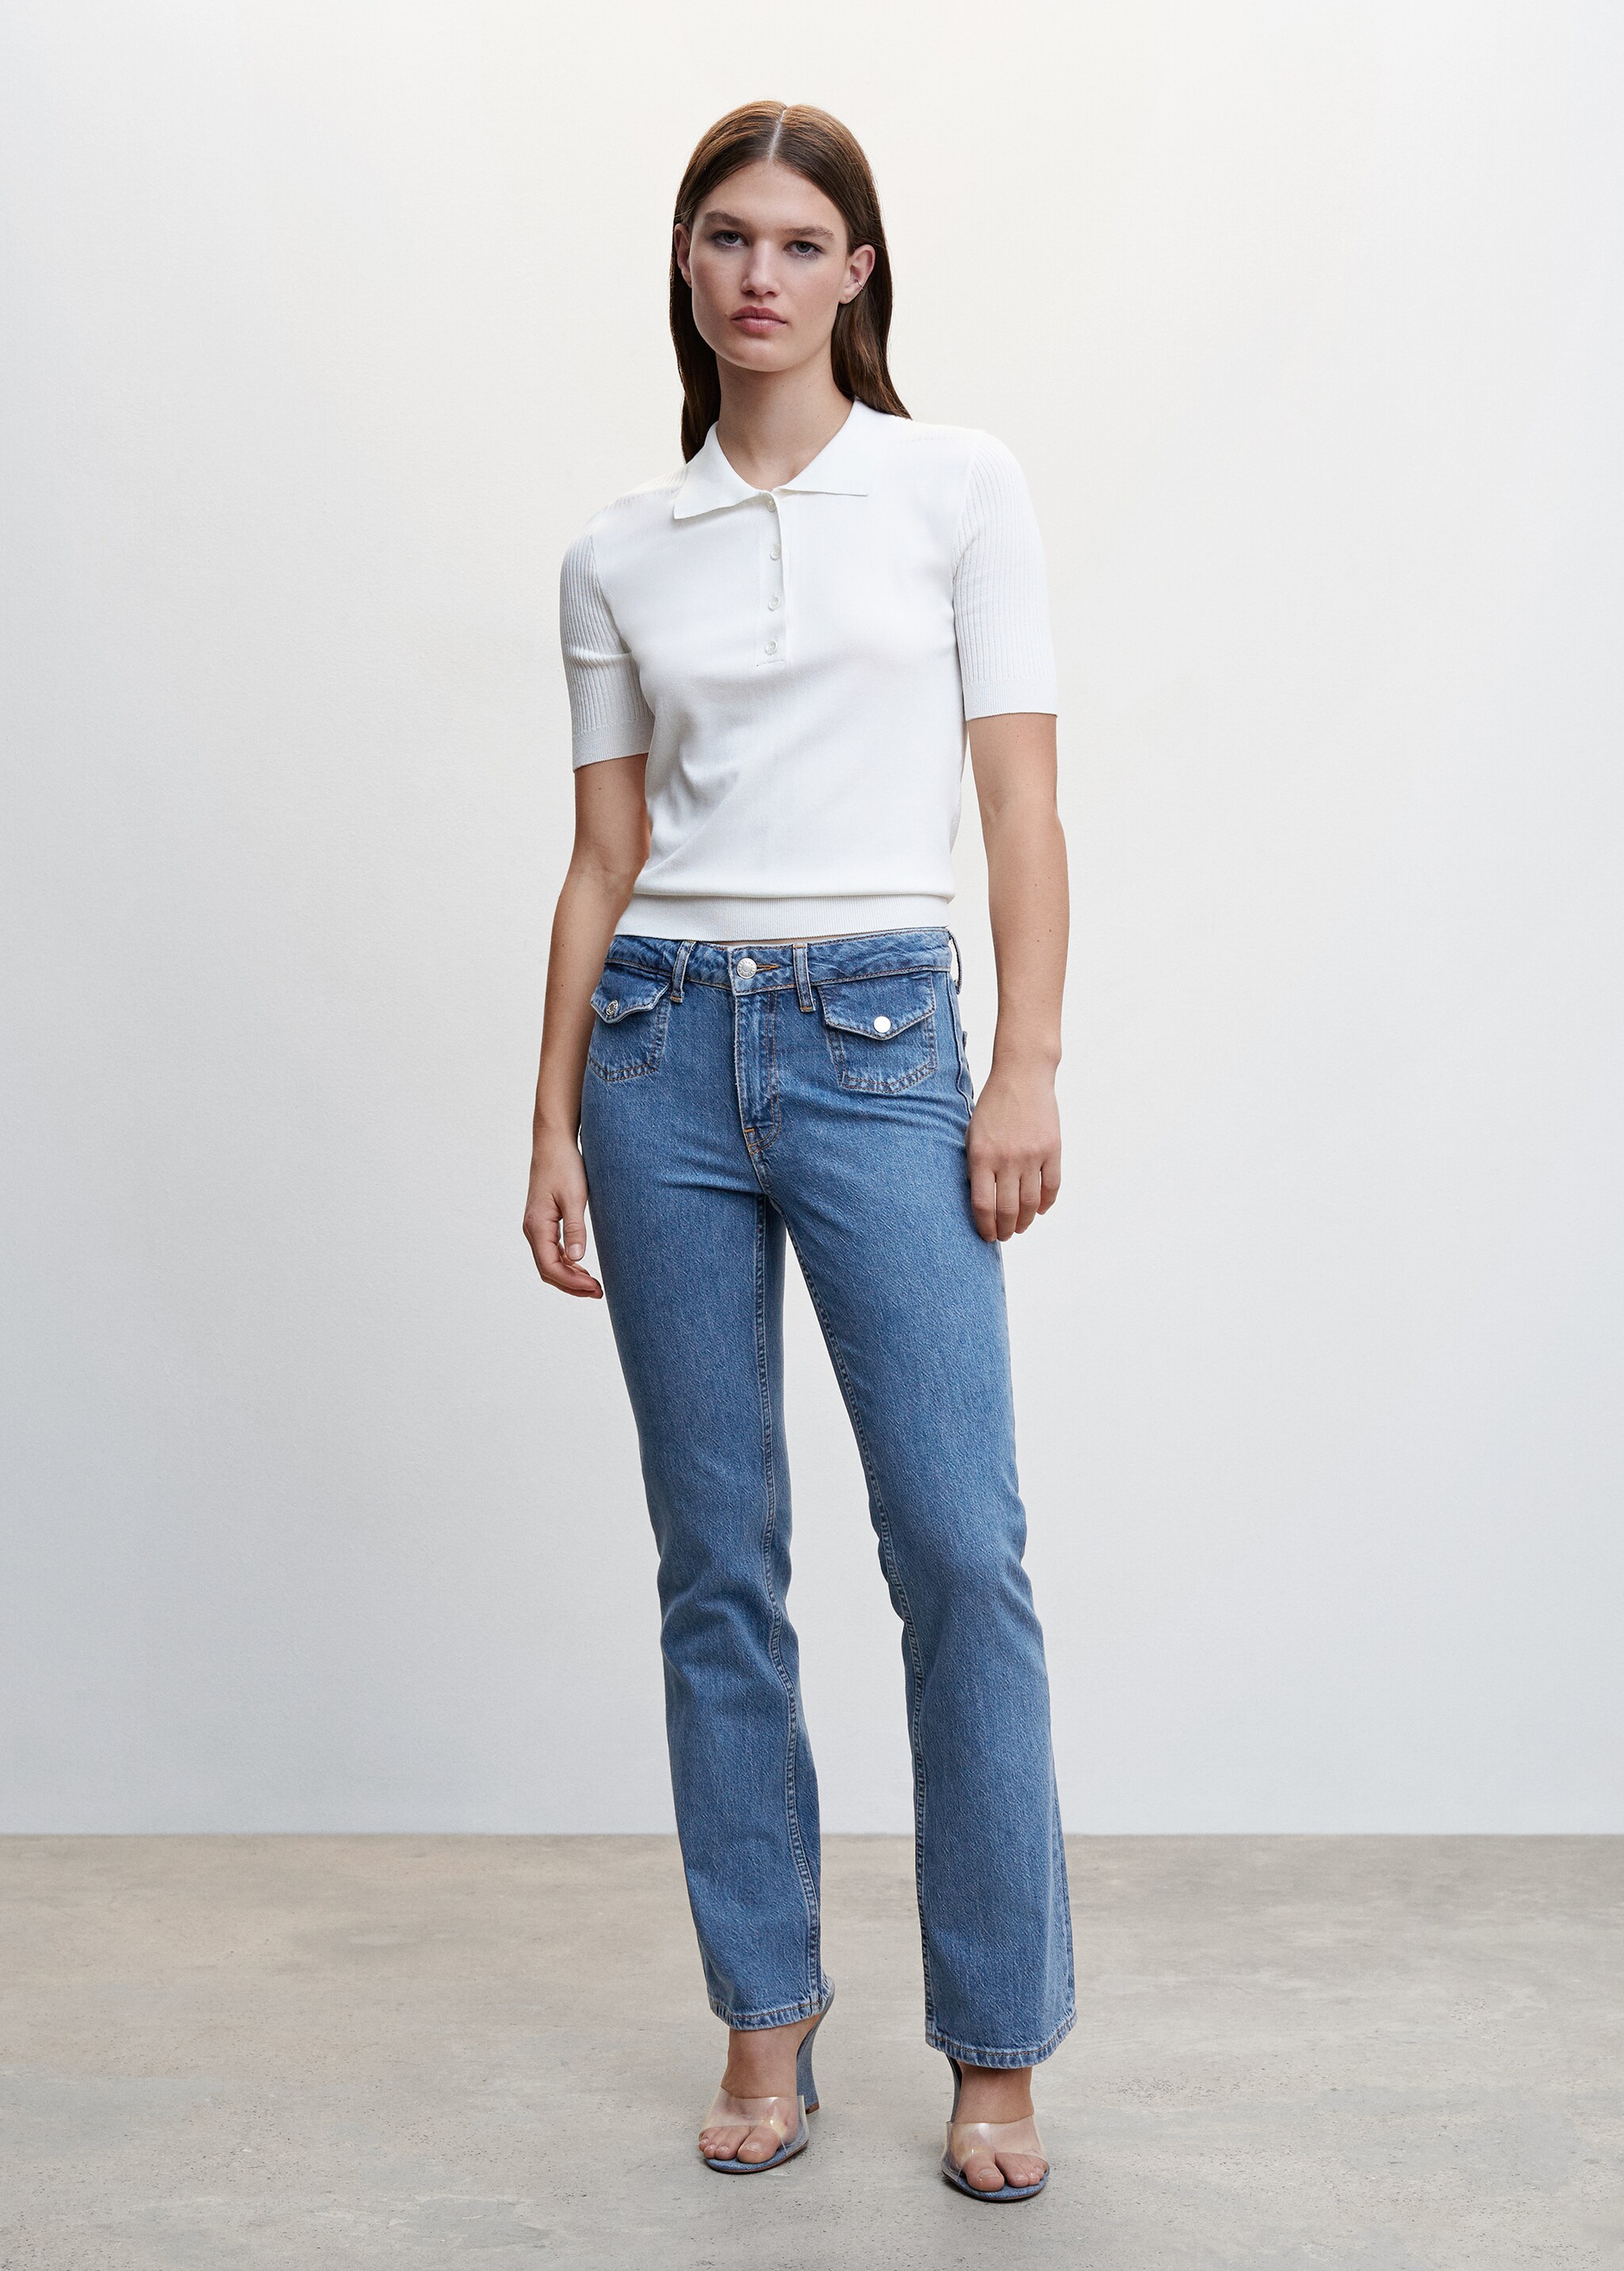 Flared jeans with pocket - General plane